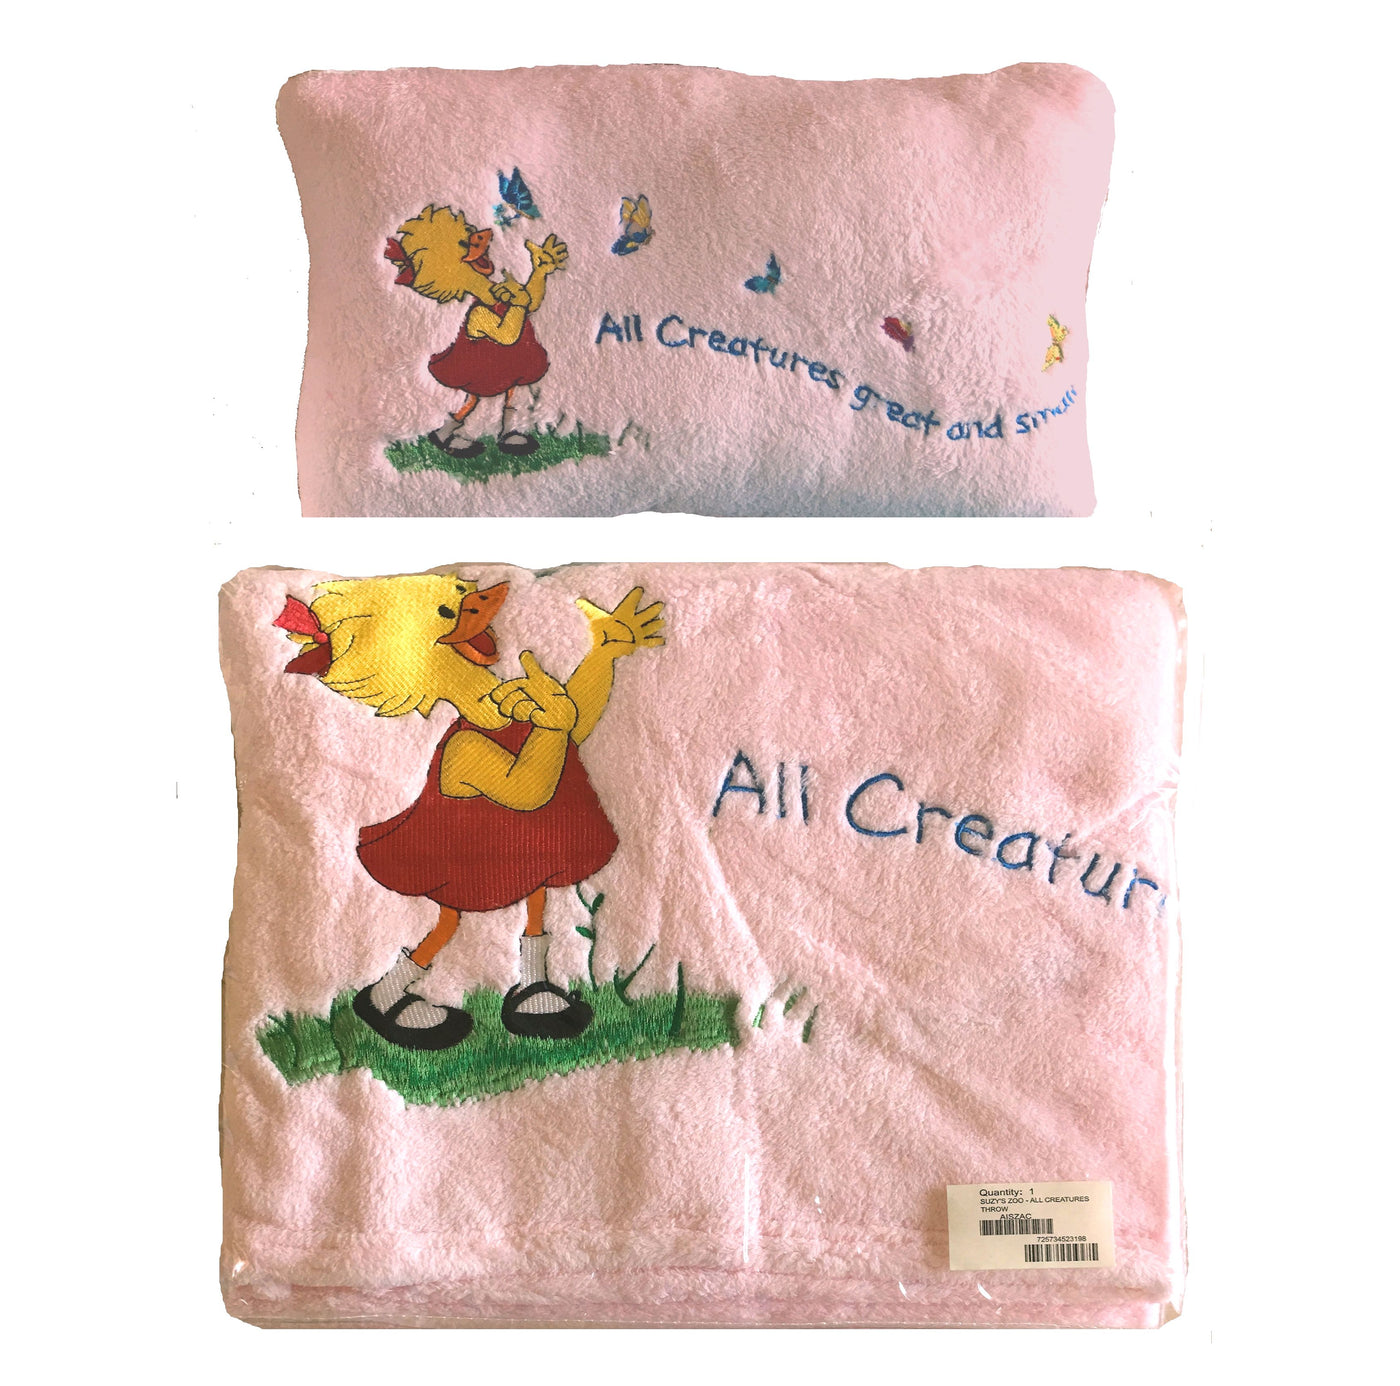 Disney Winnie The Pooh Zippered Throw Pillow COVER 18 x 18